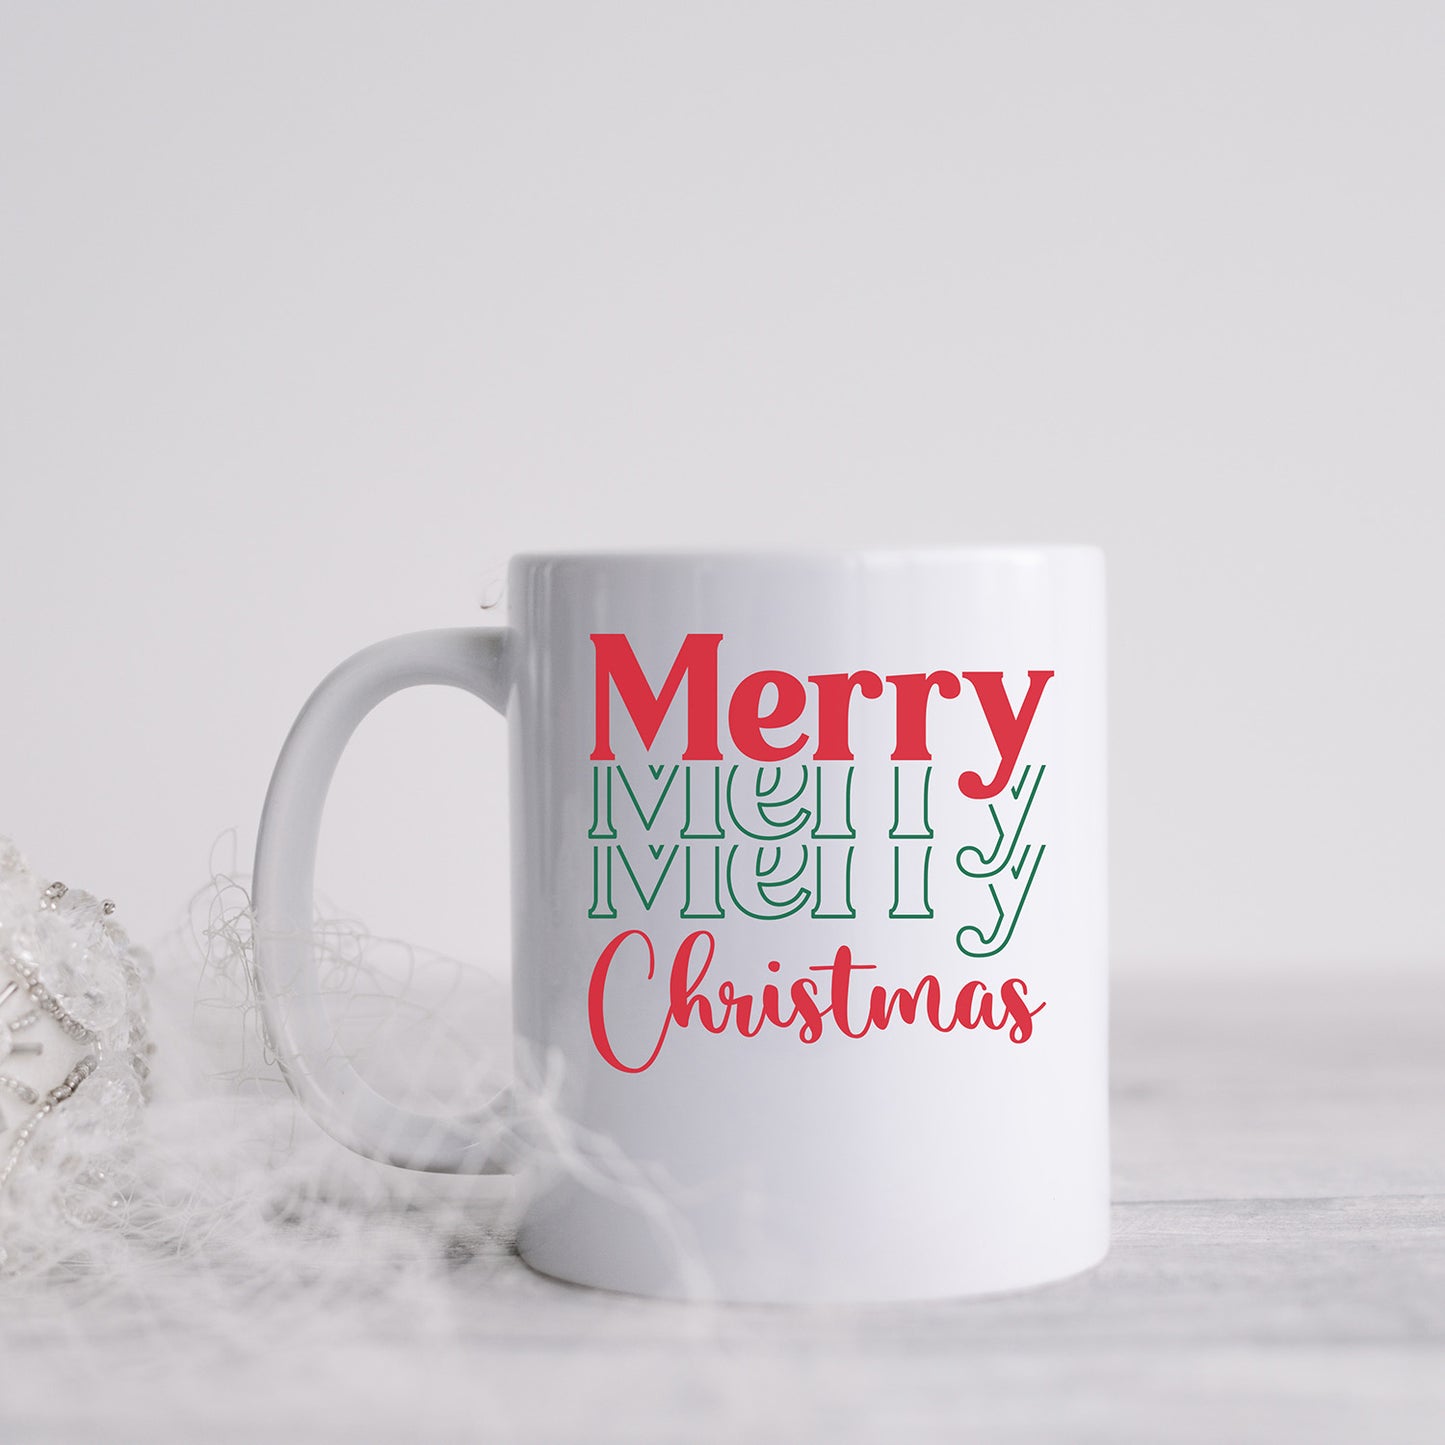 "Merry Merry Merry Christmas" Graphic